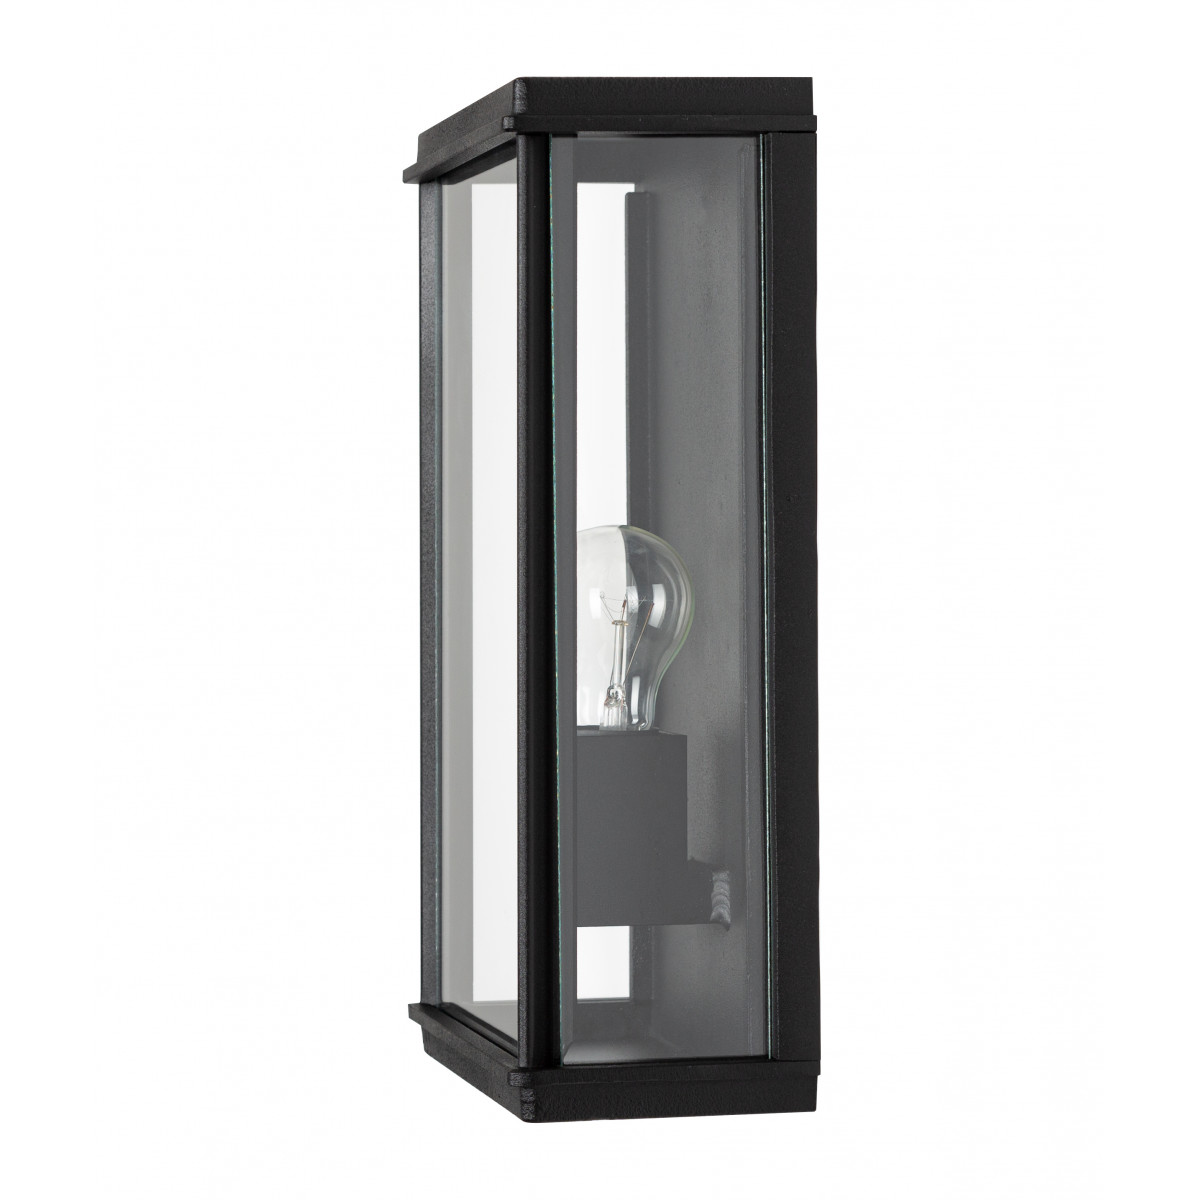 Modern exterior lighting beautiful black outdoor flush mount modern classic rectangle outdoor wall lamp with glass panels from KS outdoor lighting company